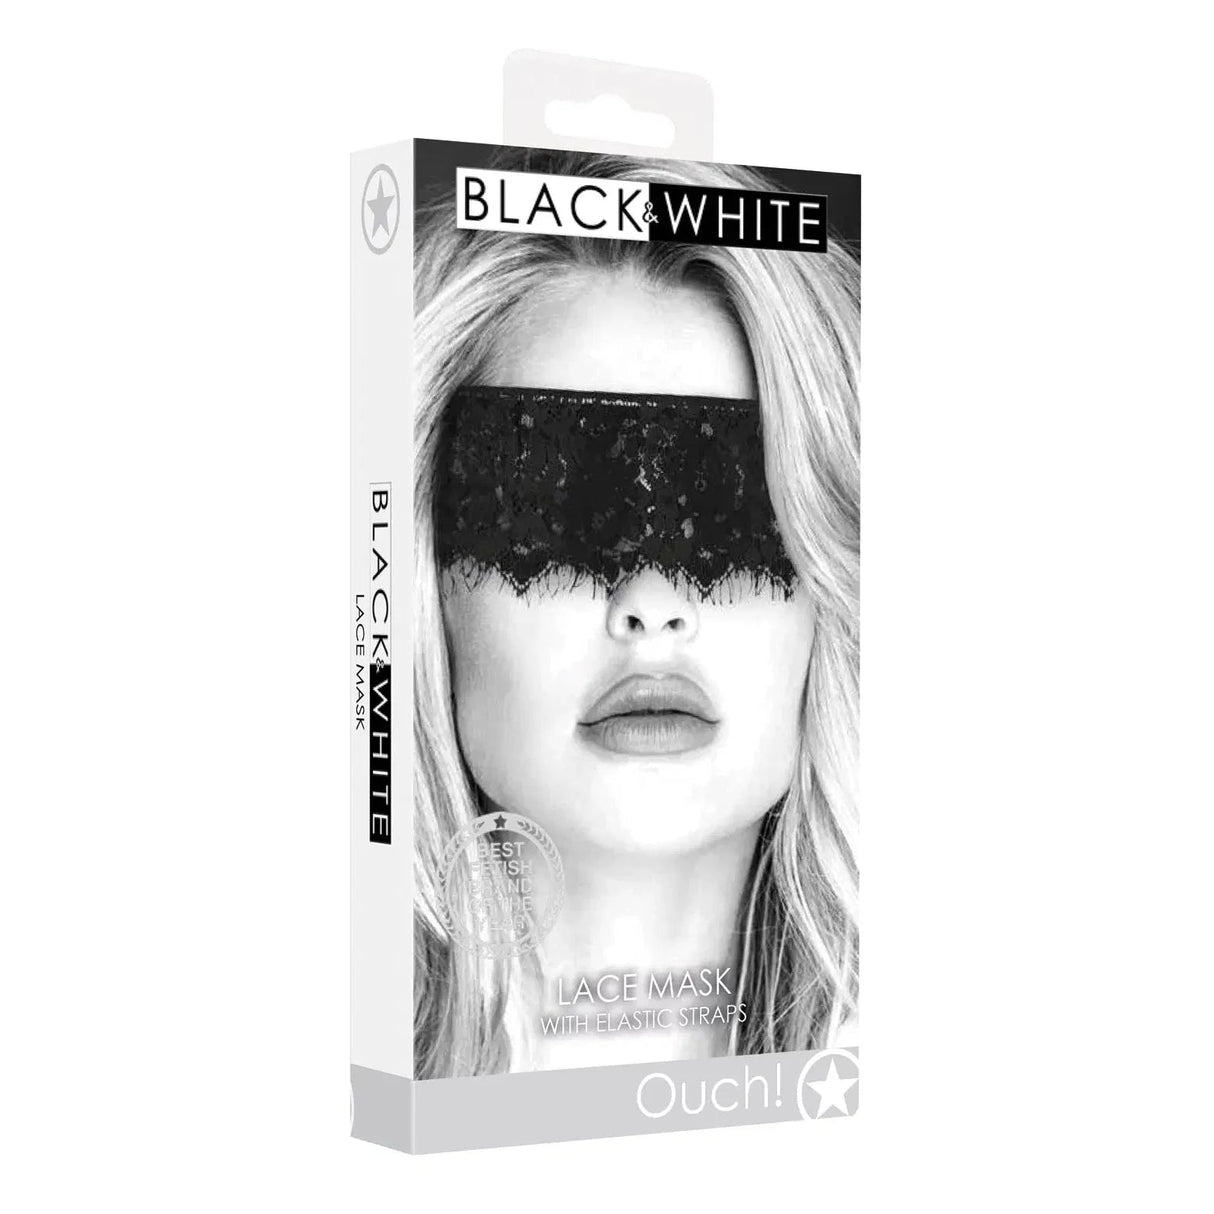 Shots Ouch Black & White Lace Mask with Elastic Straps